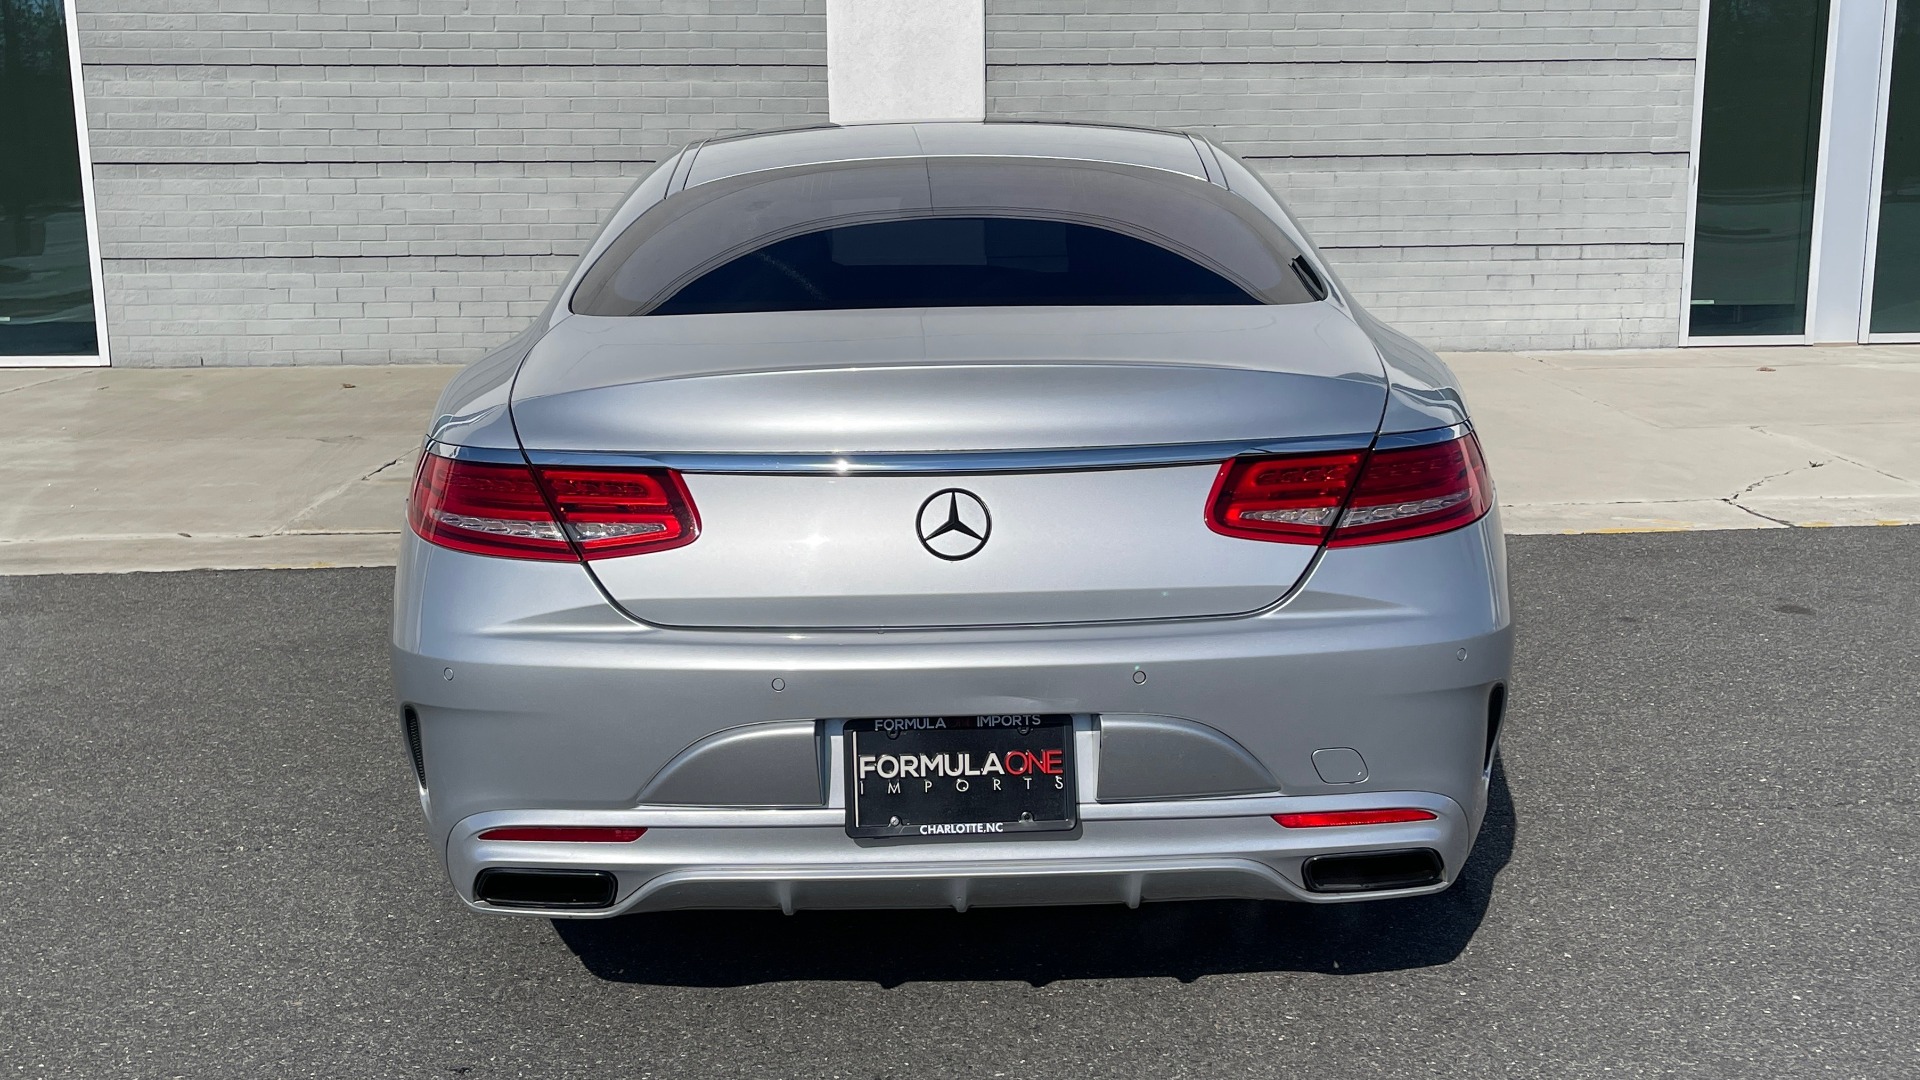 Used 2016 Mercedes-Benz S-CLASS S 550 4MATIC COUPE PREMIUM / SPORT / NAV / SUNROOF / REARVIEW for sale Sold at Formula Imports in Charlotte NC 28227 21